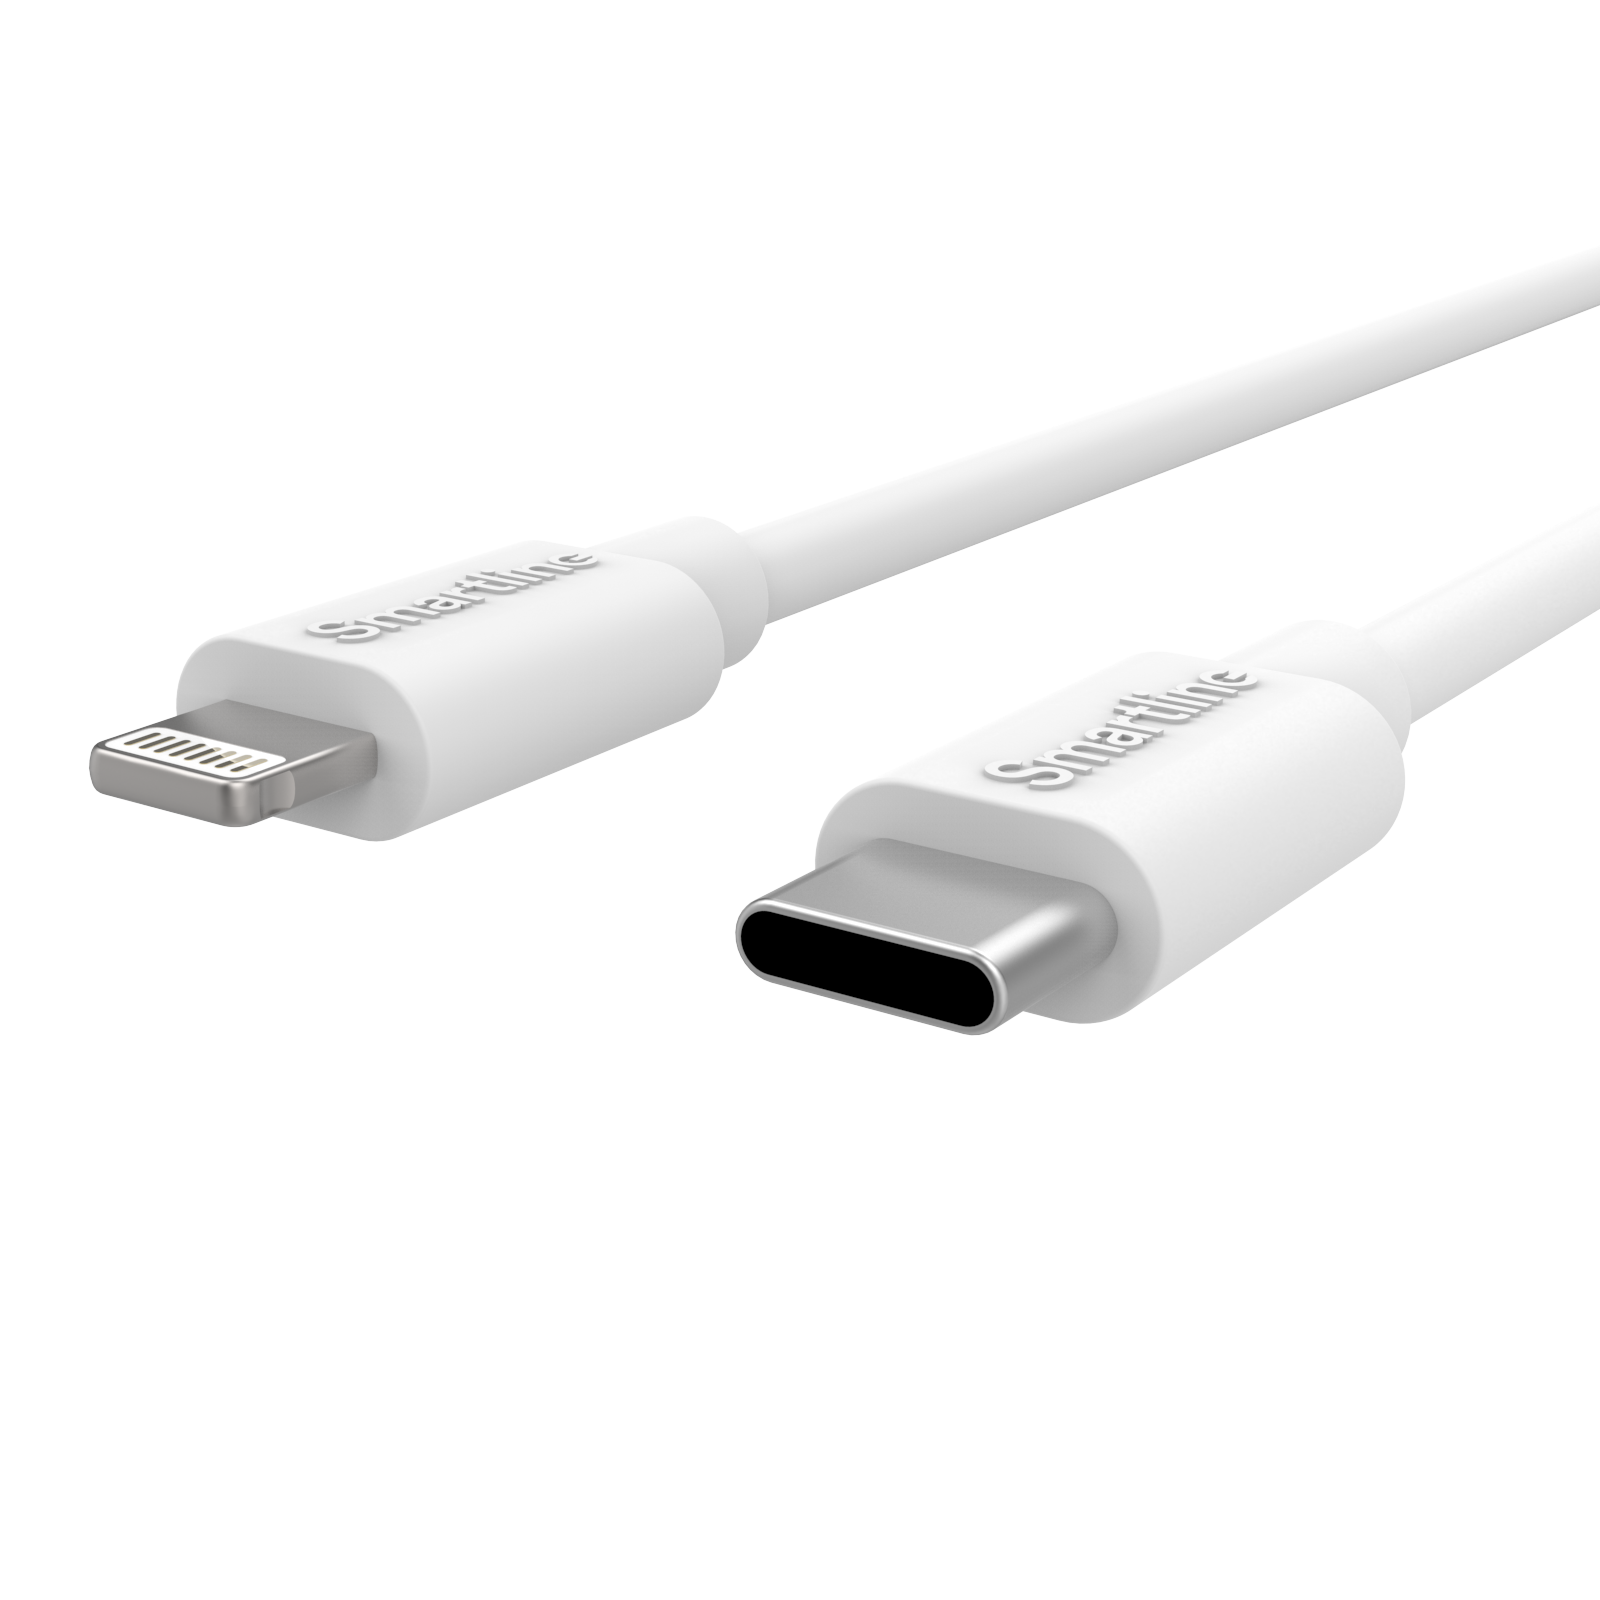 Complete Charger for iPhone SE (2022) - 2m Cable and Wall Charger - Smartline